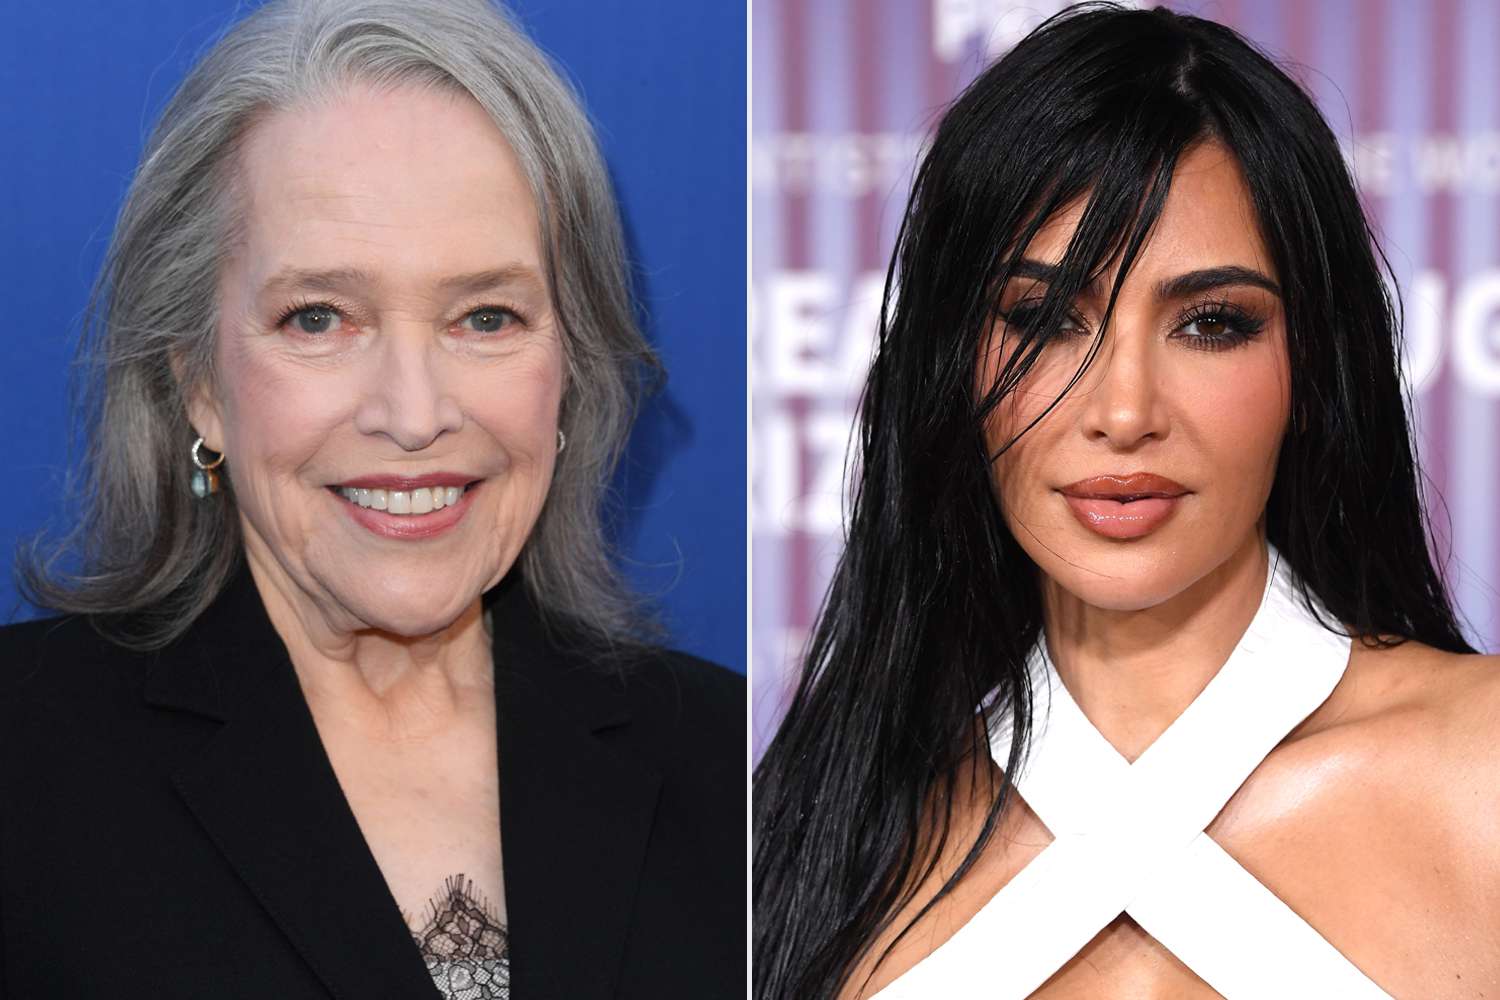 Kathy Bates Says She's 'Ready' to Star in a SKIMS Campaign: 'Kim, I'm Waiting' (Exclusive)